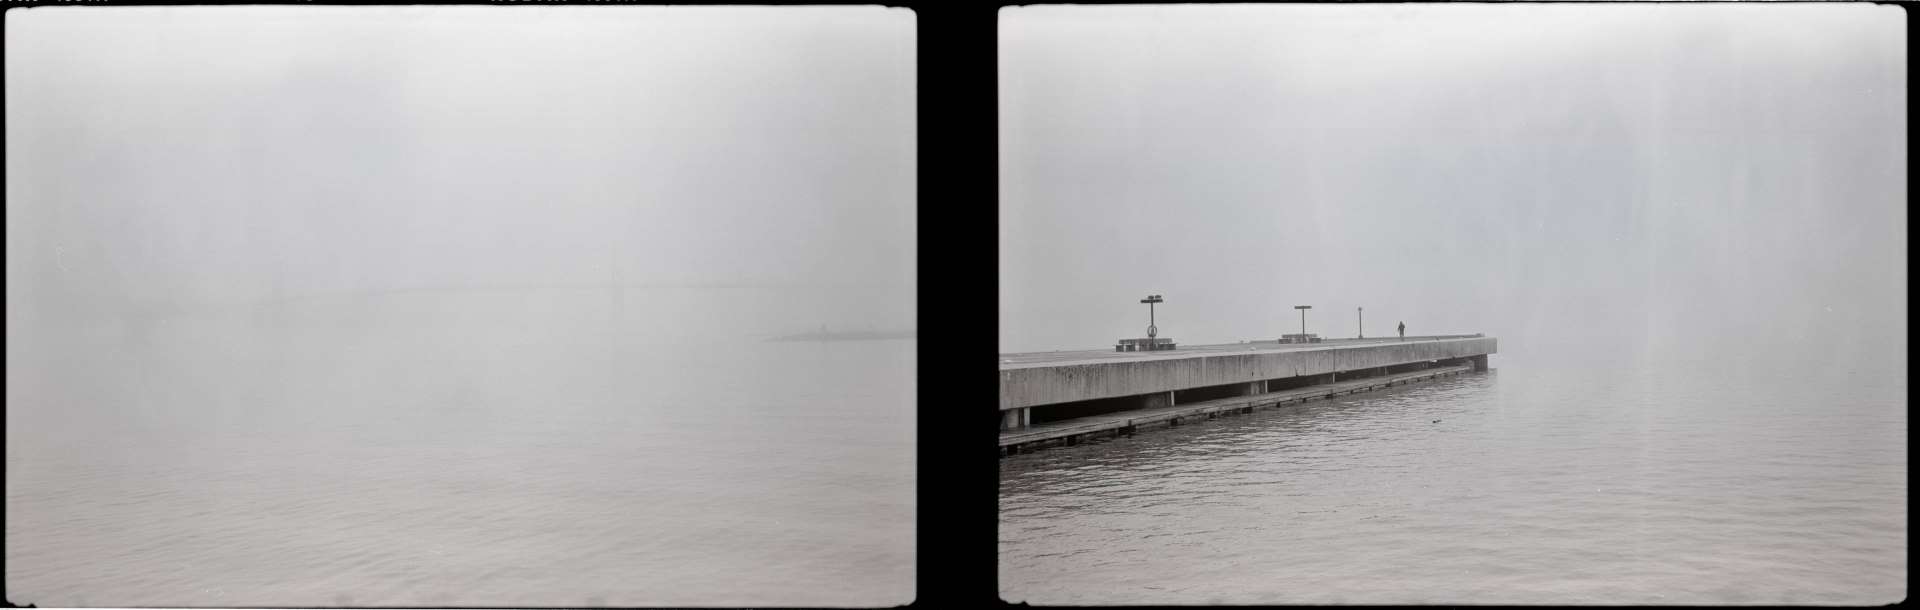 A black and white diptych photograph of a Halifax Harbour with a suspension bridge shrouded in fog on the left panel and a man standing at the end of a pier on the right